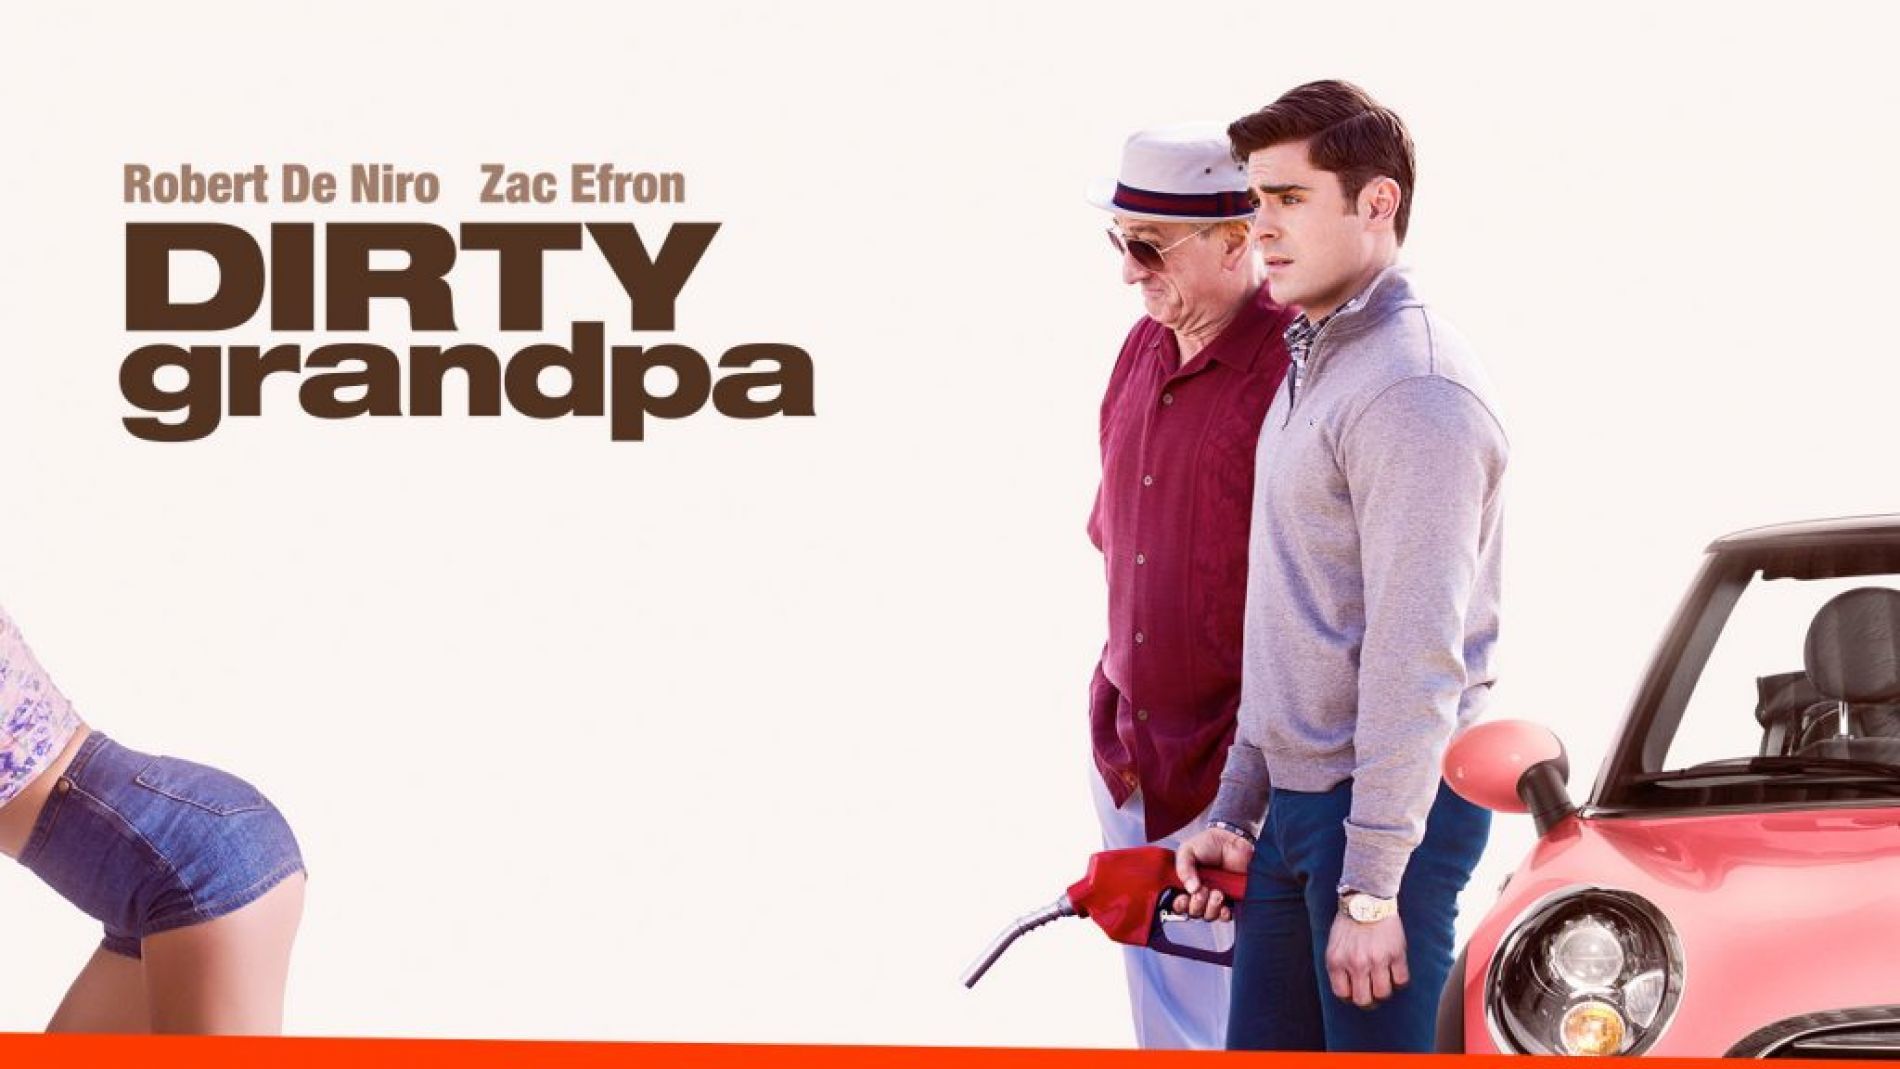 'The Buzz' by Timmy Trumpet & New World Sound in Dirty Grandpa Trailer